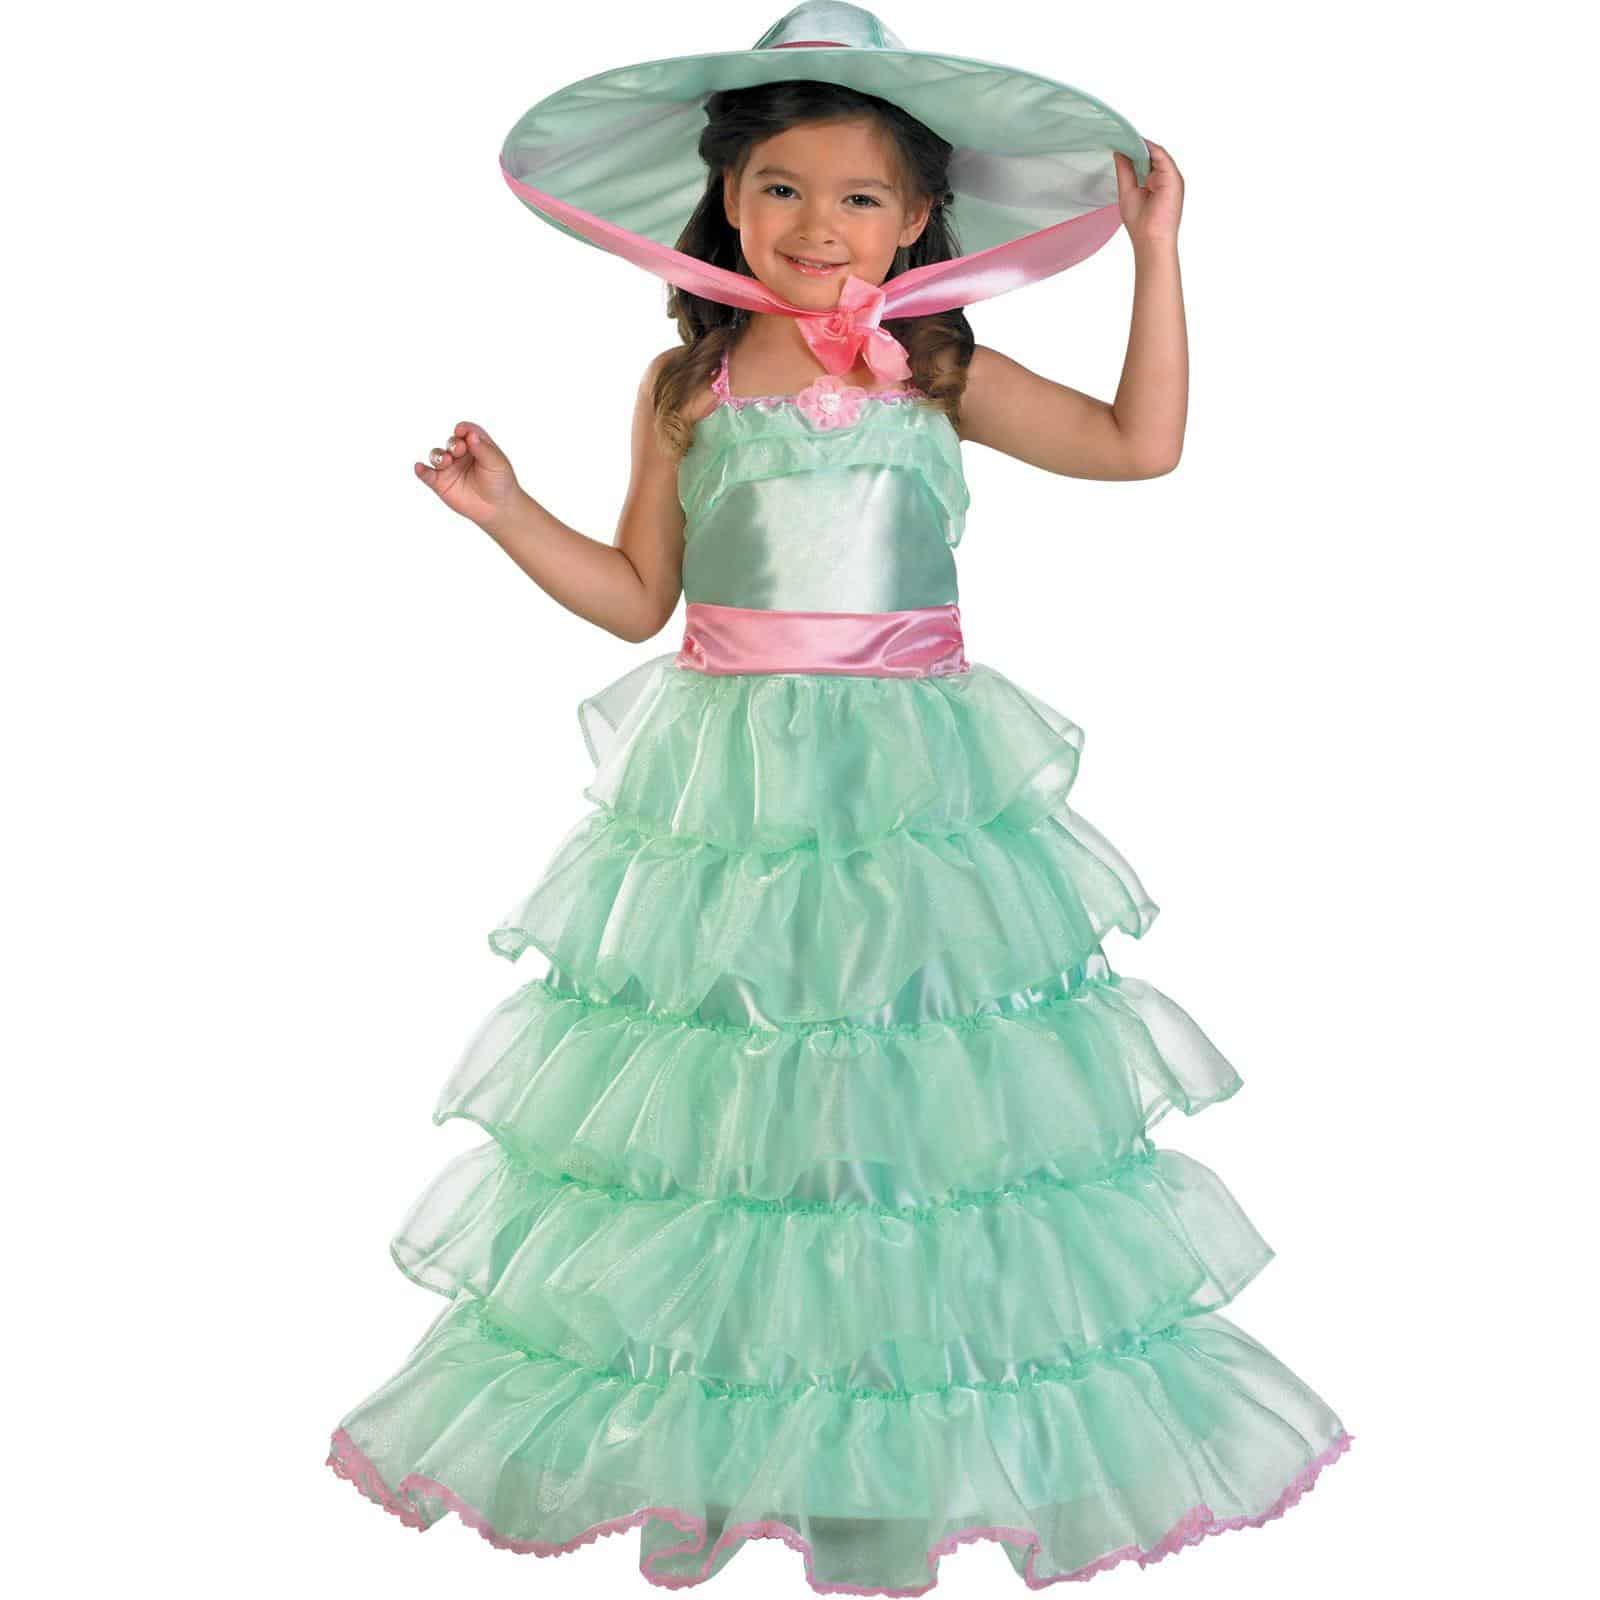 Southern Belle Toddler Costume